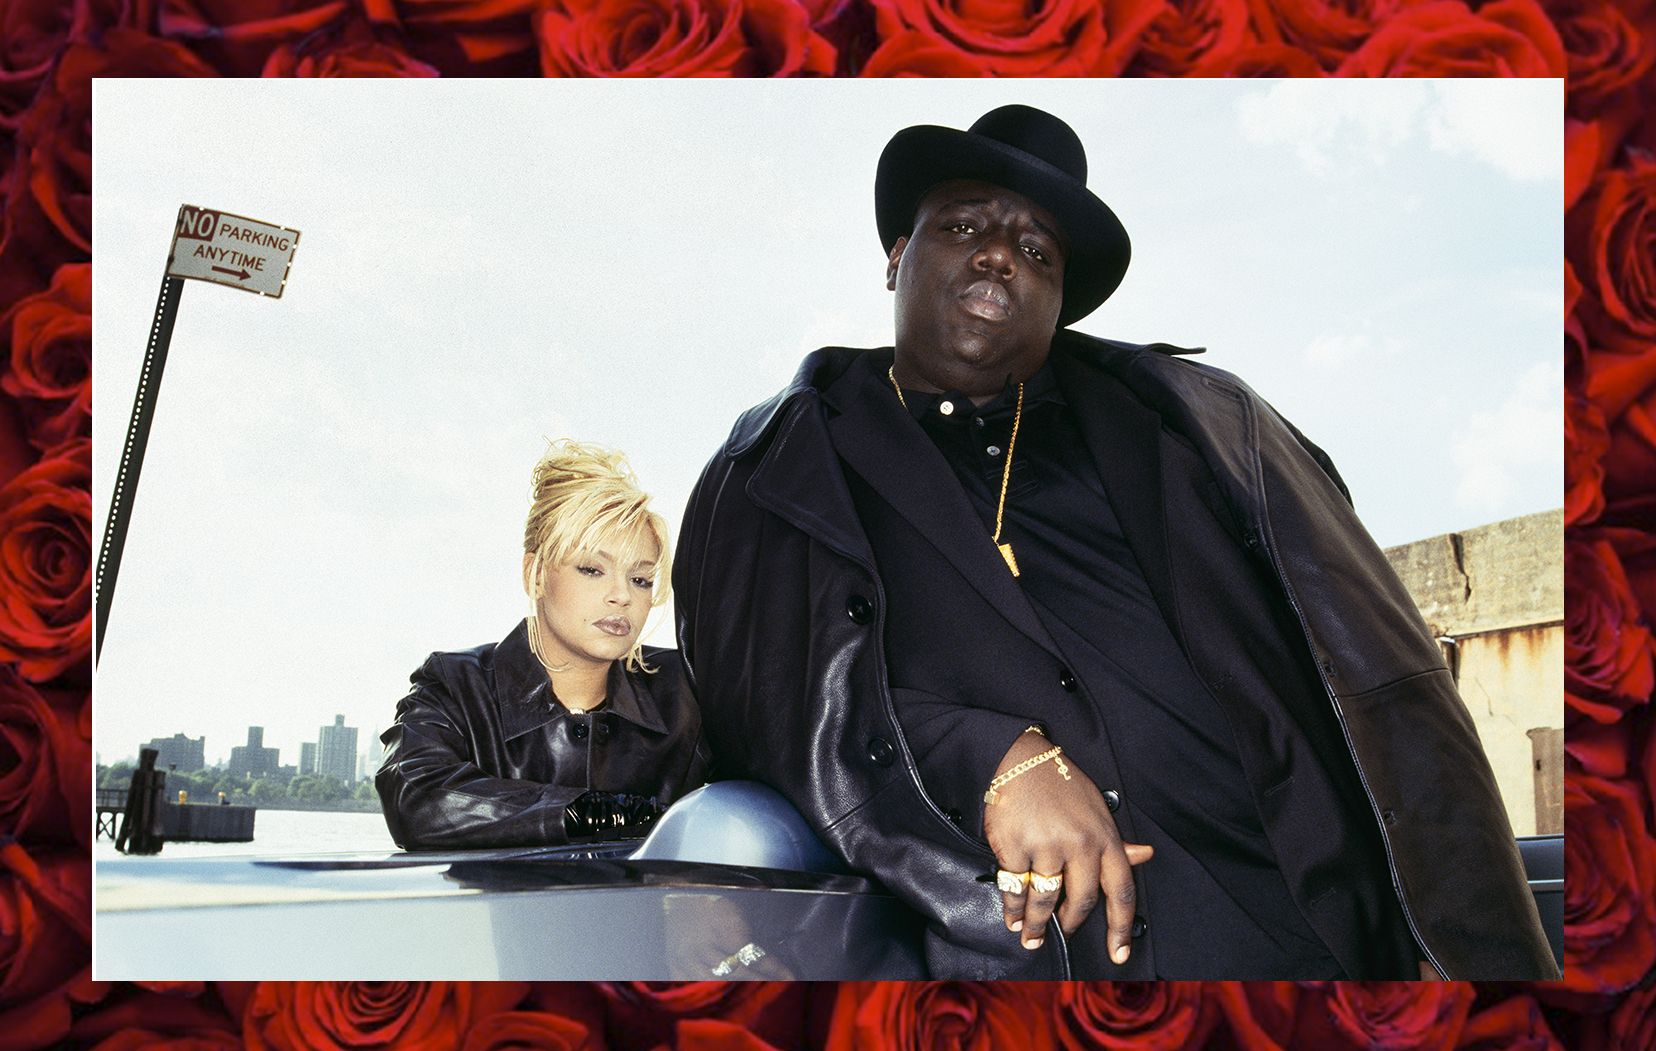 The Immortal Appeal Of The Late, Great Notorious B.I.G.